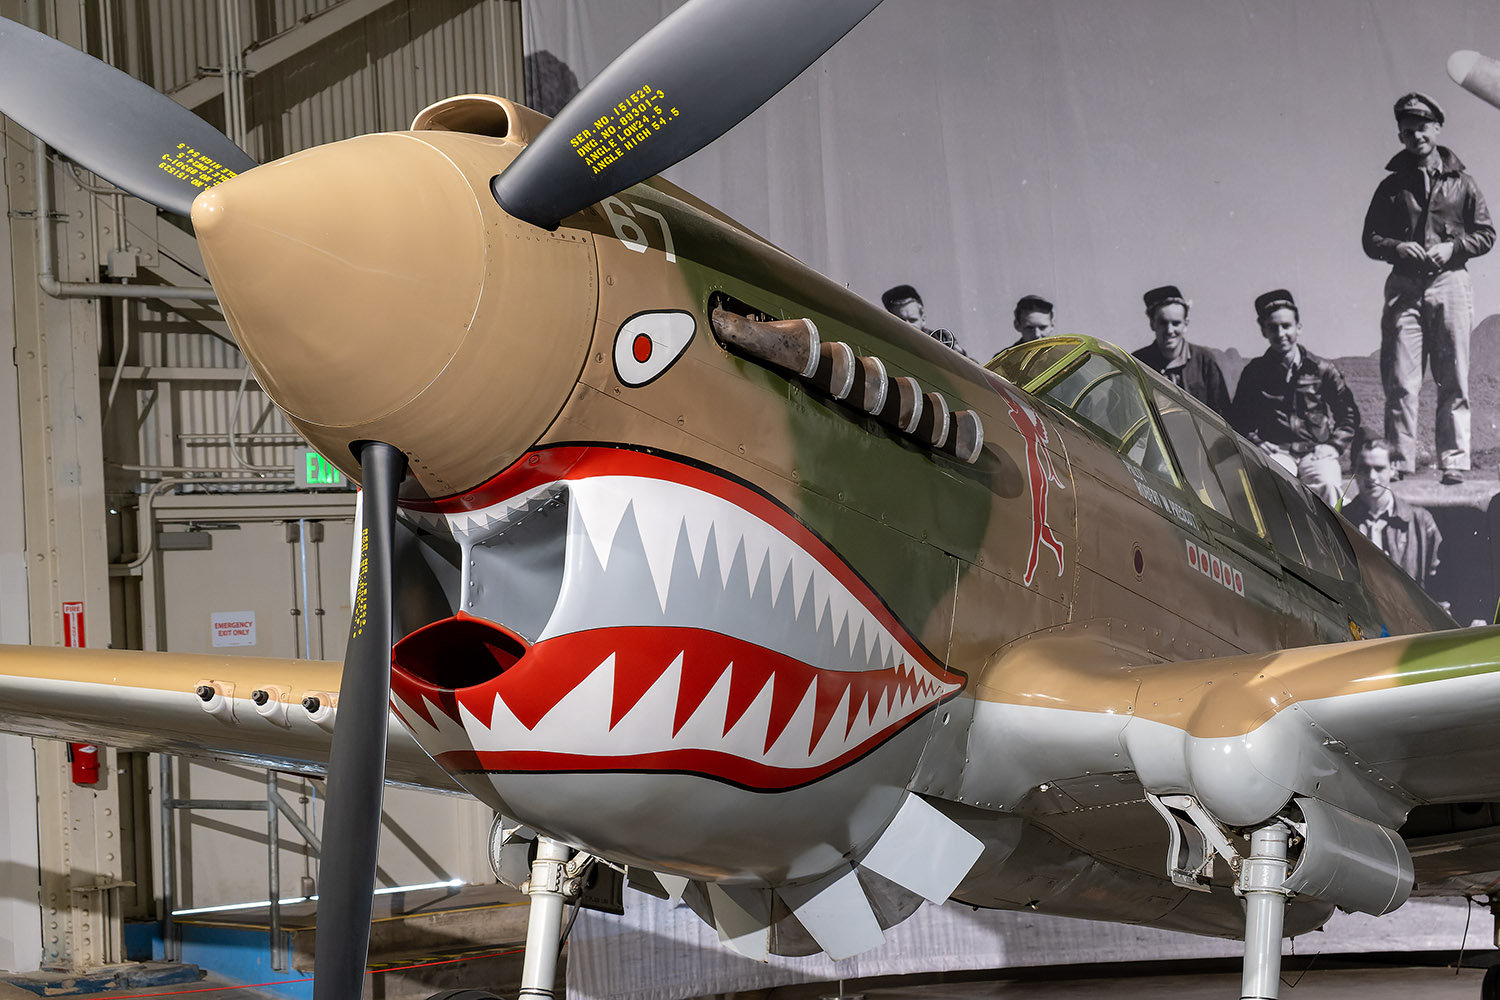 A shark-mouthed Curtiss P-40 Warhawk flown by the volunteer group 'Flying Tigers'